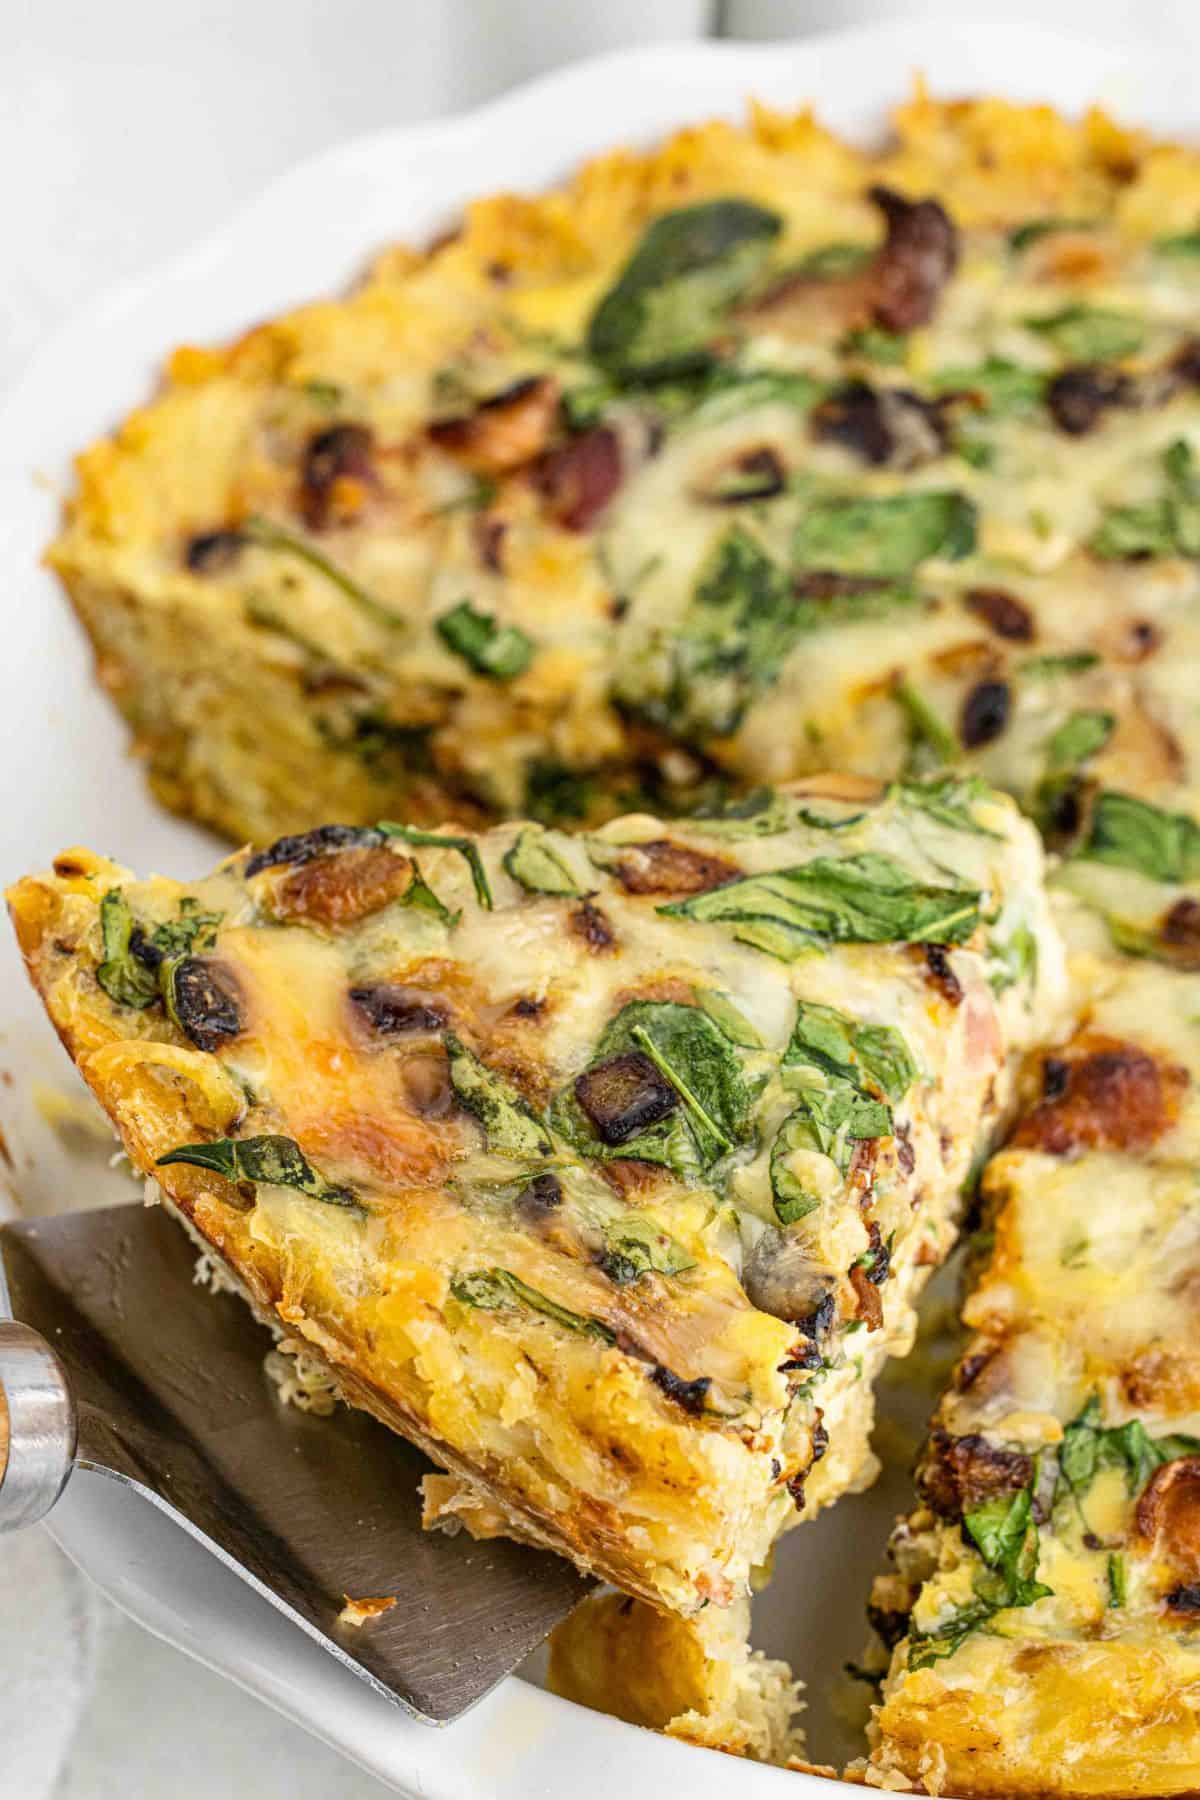 Spinach bacon hash brown quiche in a pie plate with a spatula lifting up a slice.